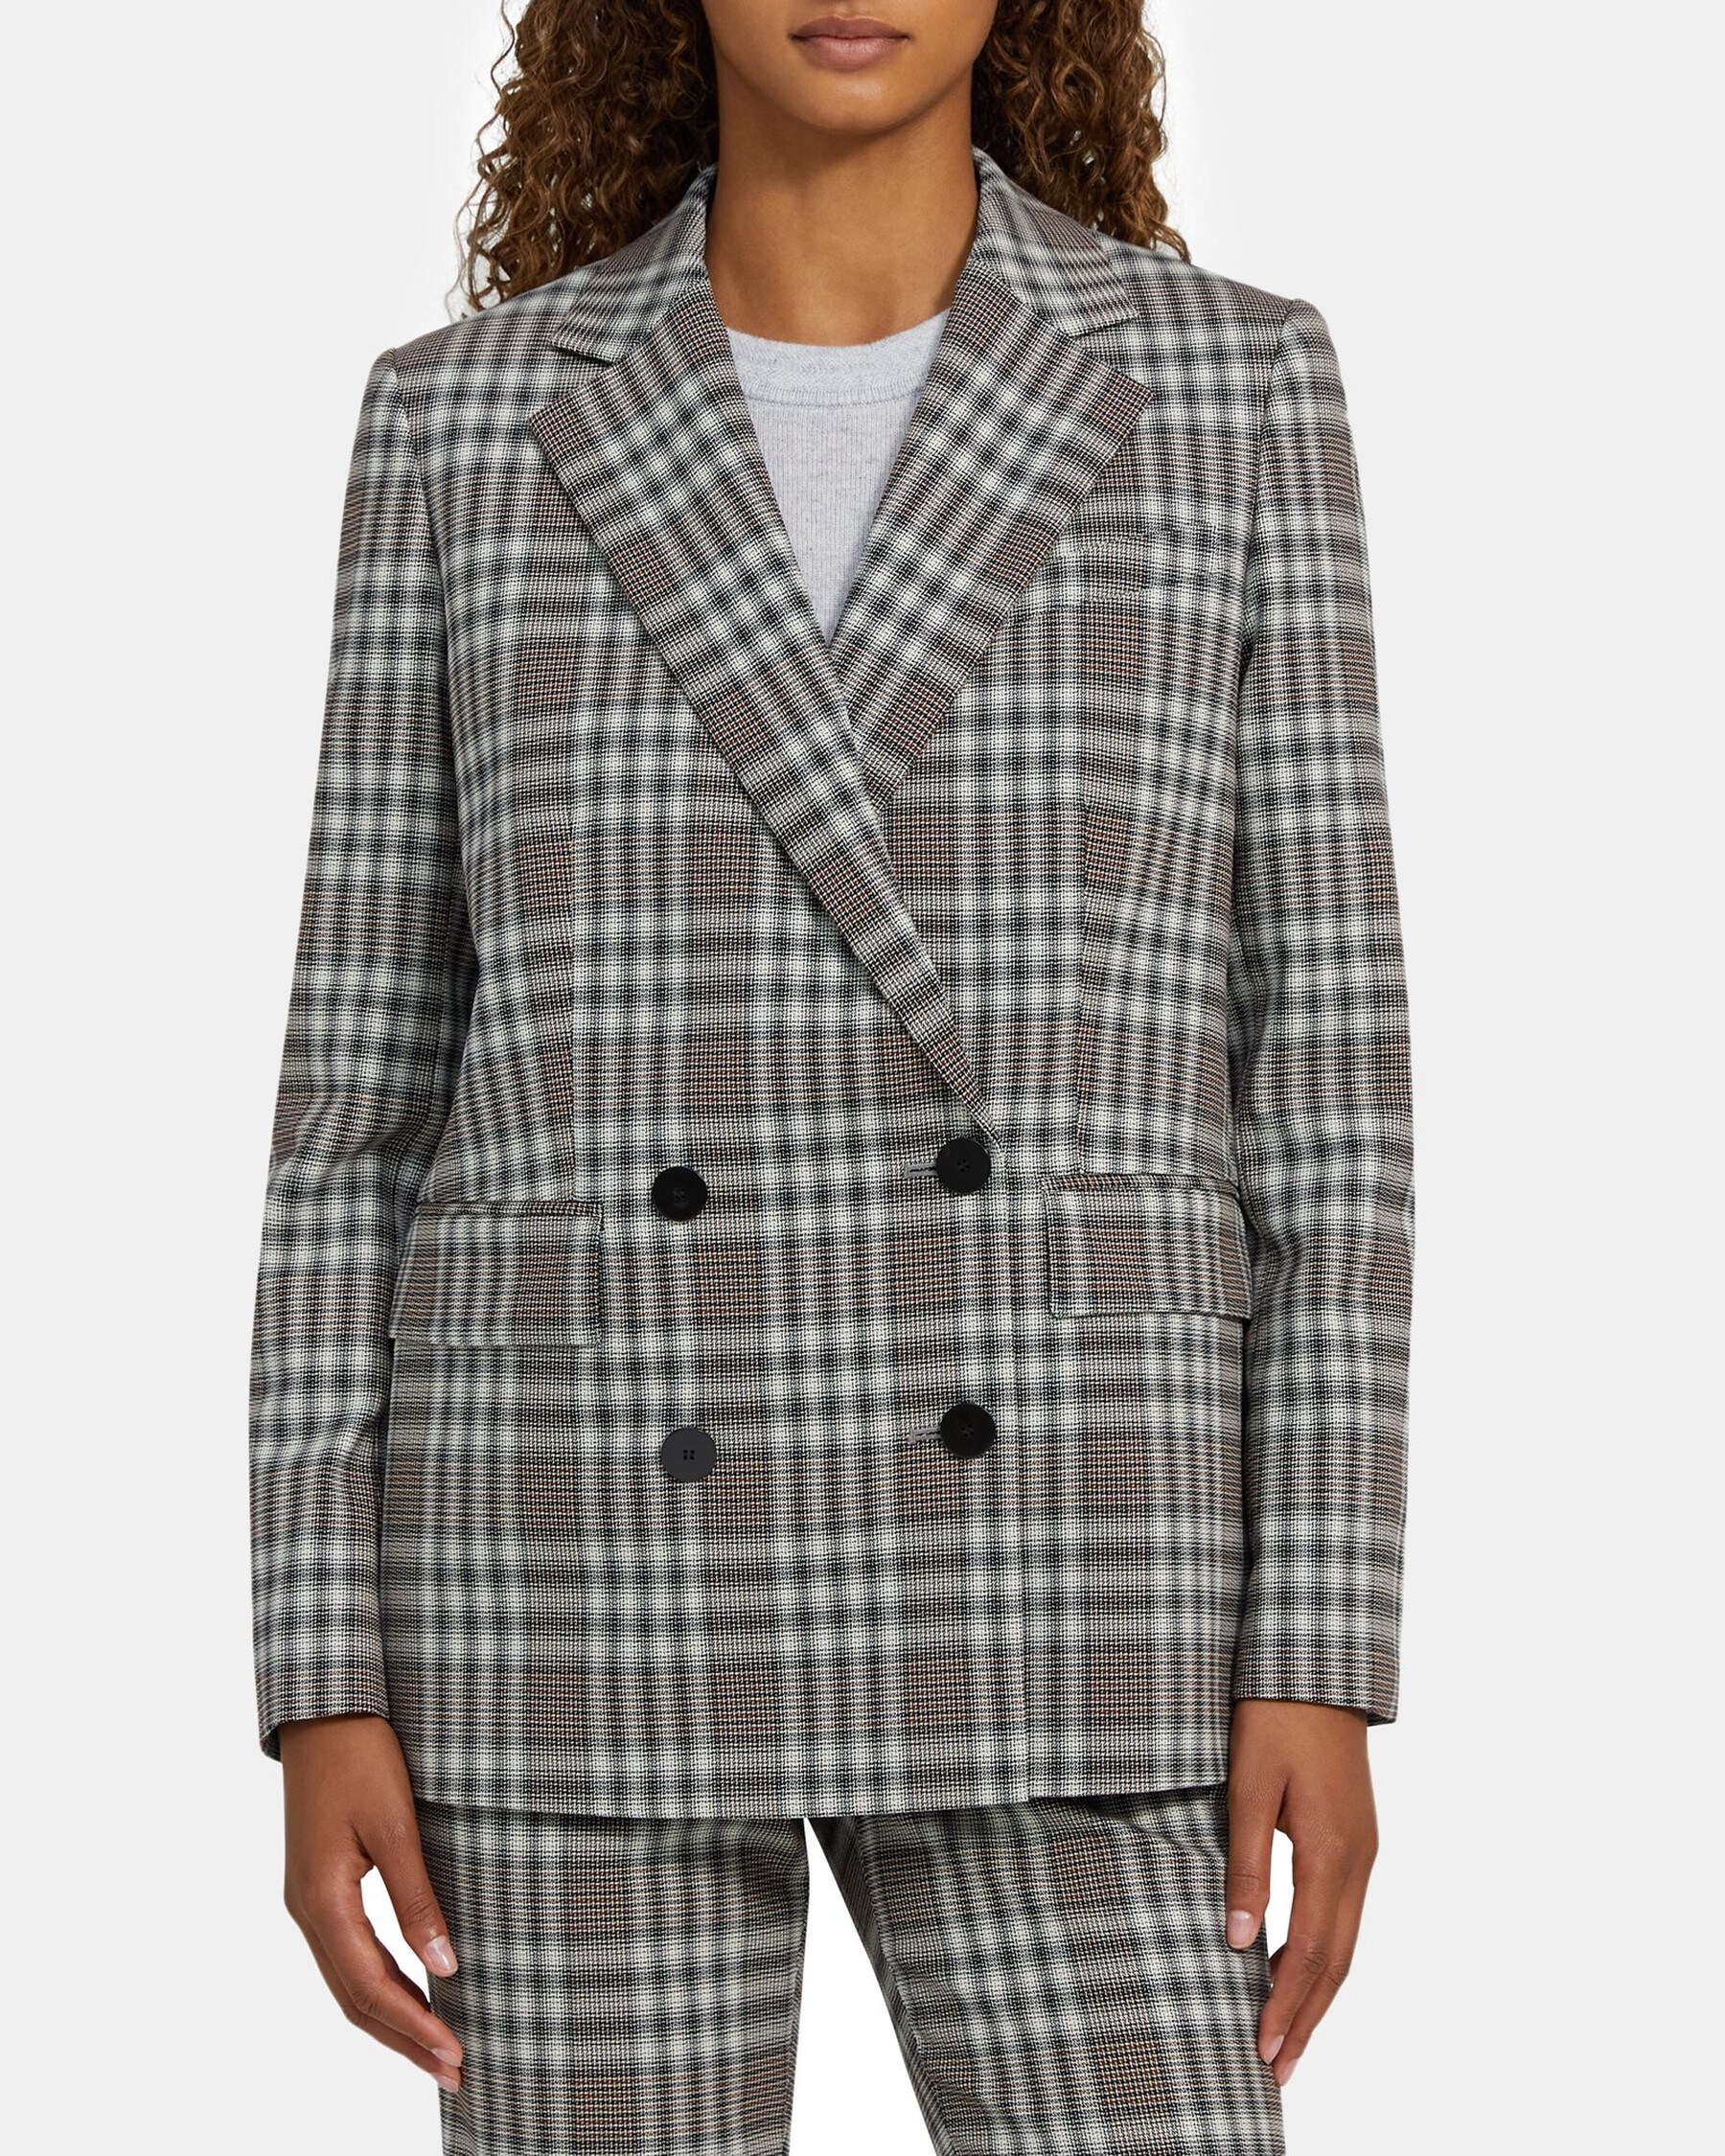 Theory Double-Breasted Jacket in Plaid Wool